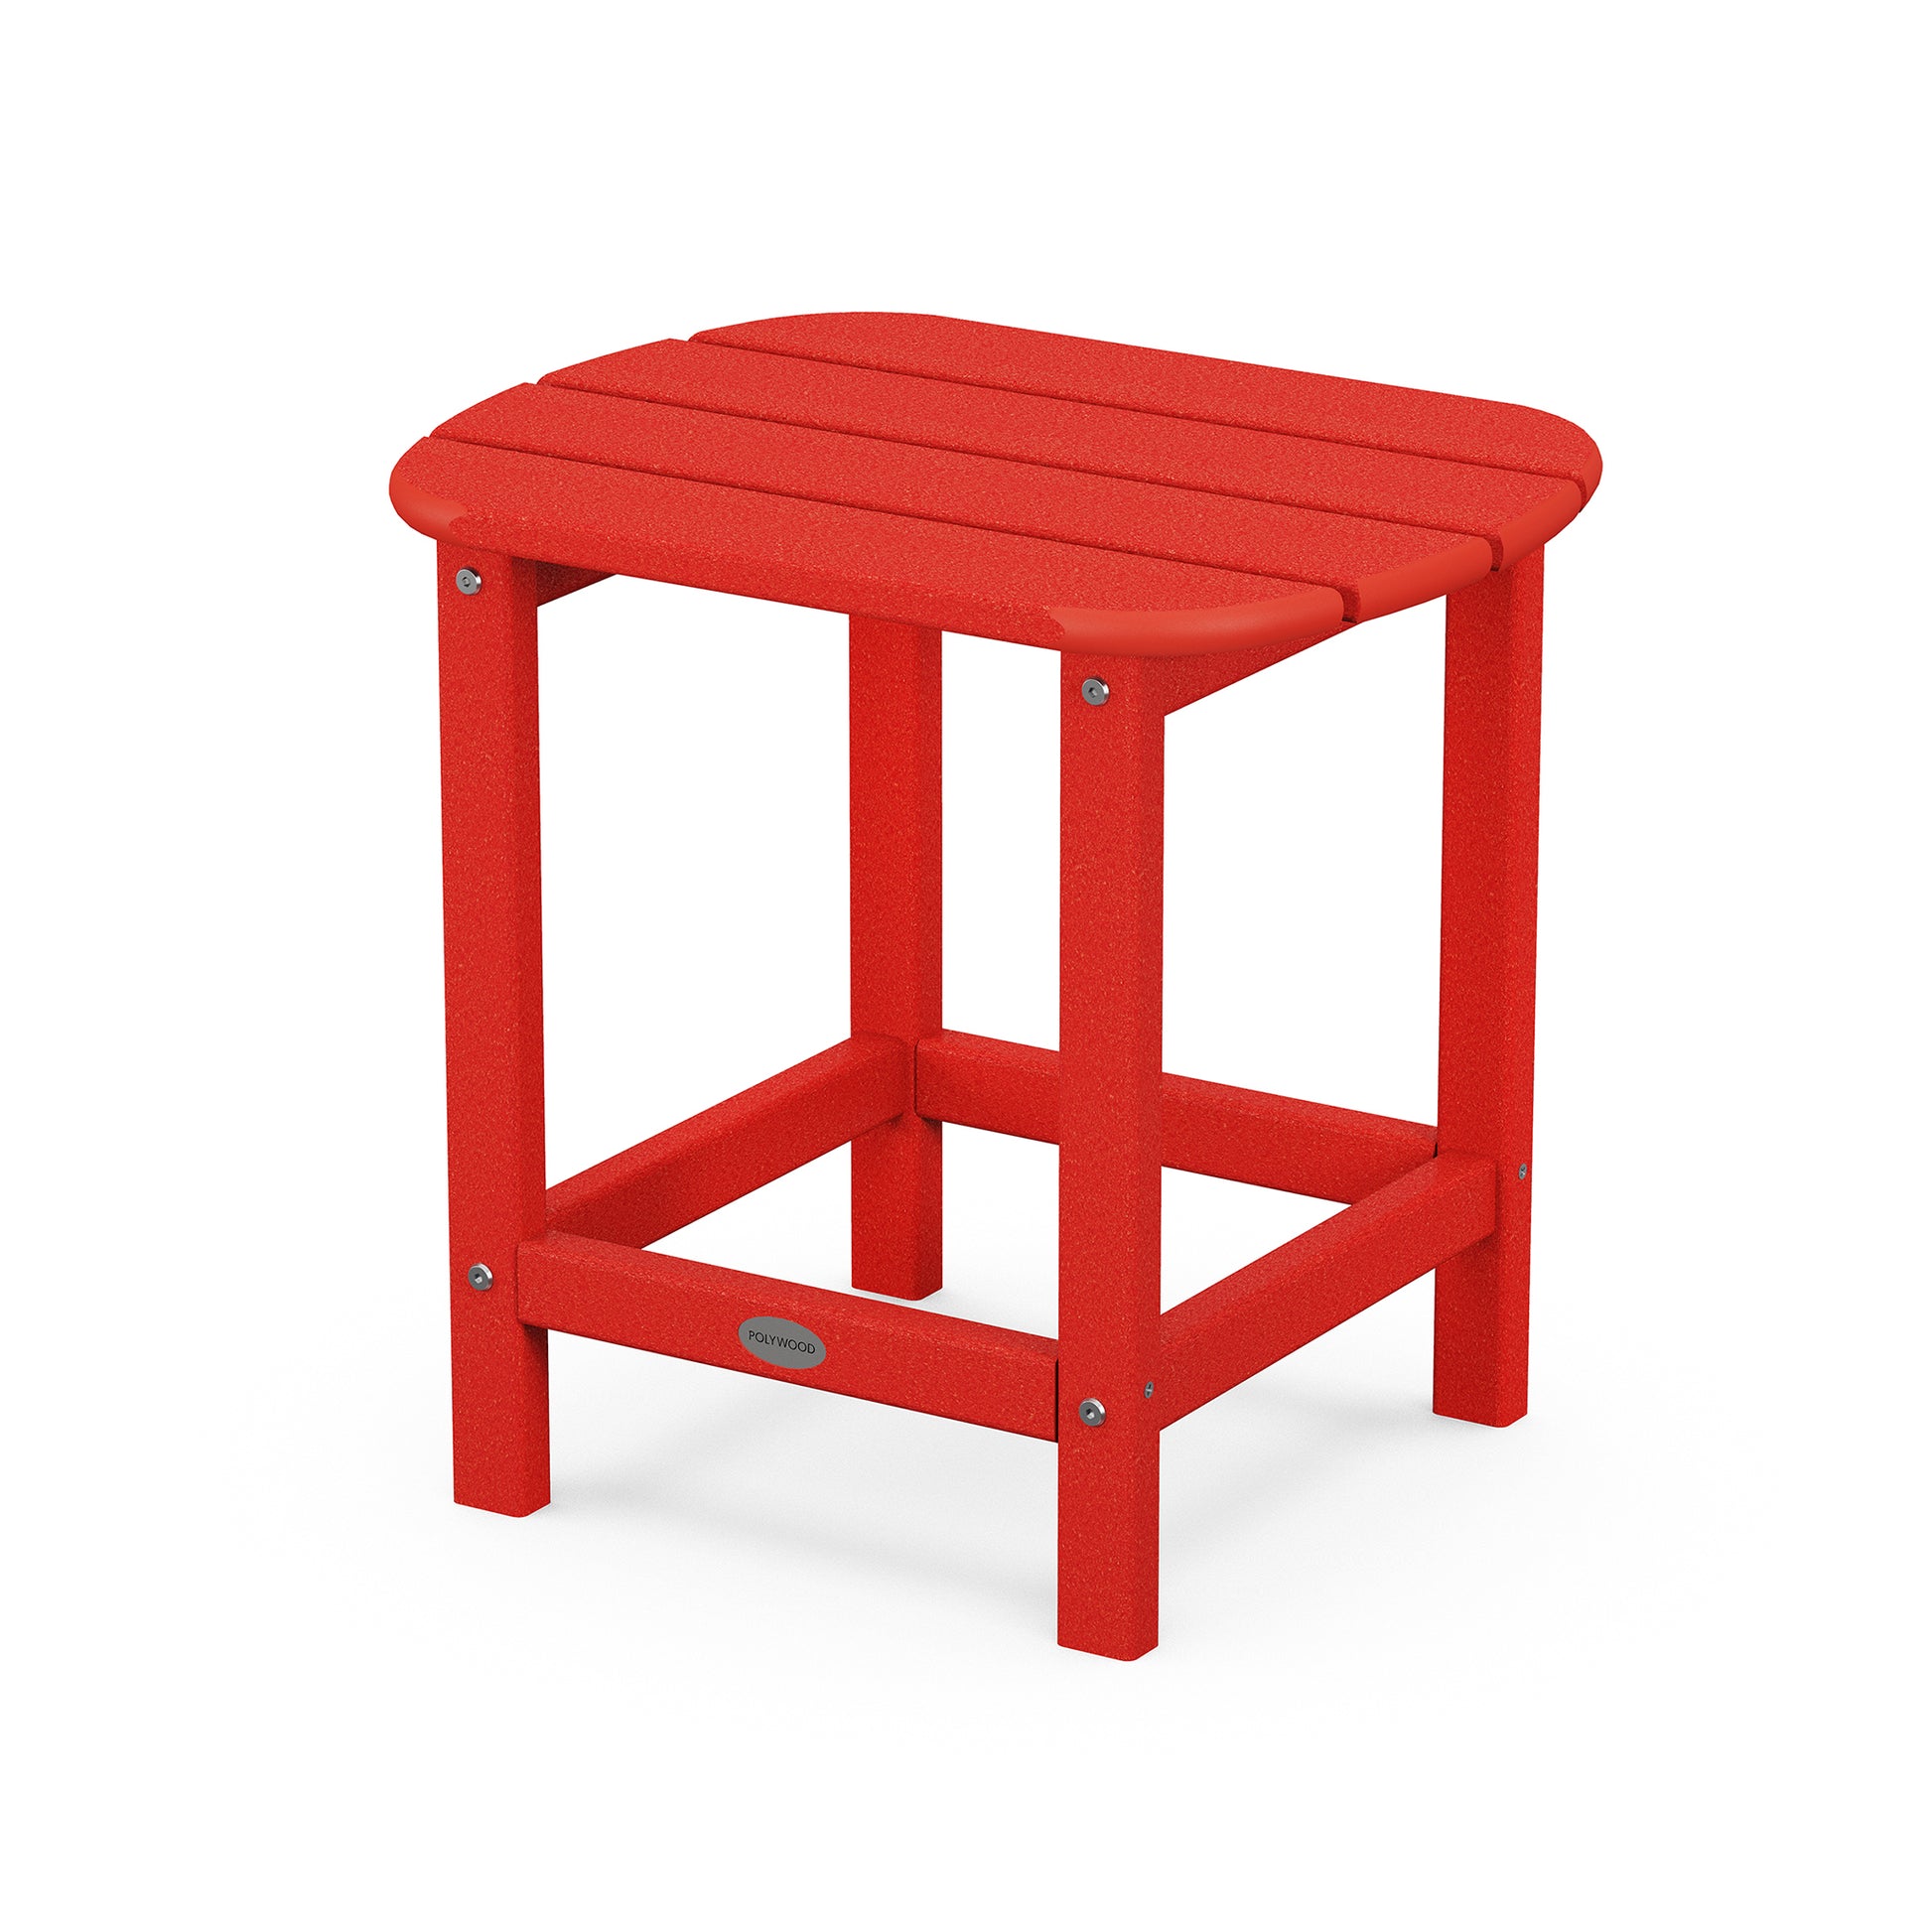 A POLYWOOD® South Beach Adirondack 18" red square outdoor side table, made of weather-resistant material, featuring a slatted top and sturdy legs with visible metal fasteners, isolated on a white